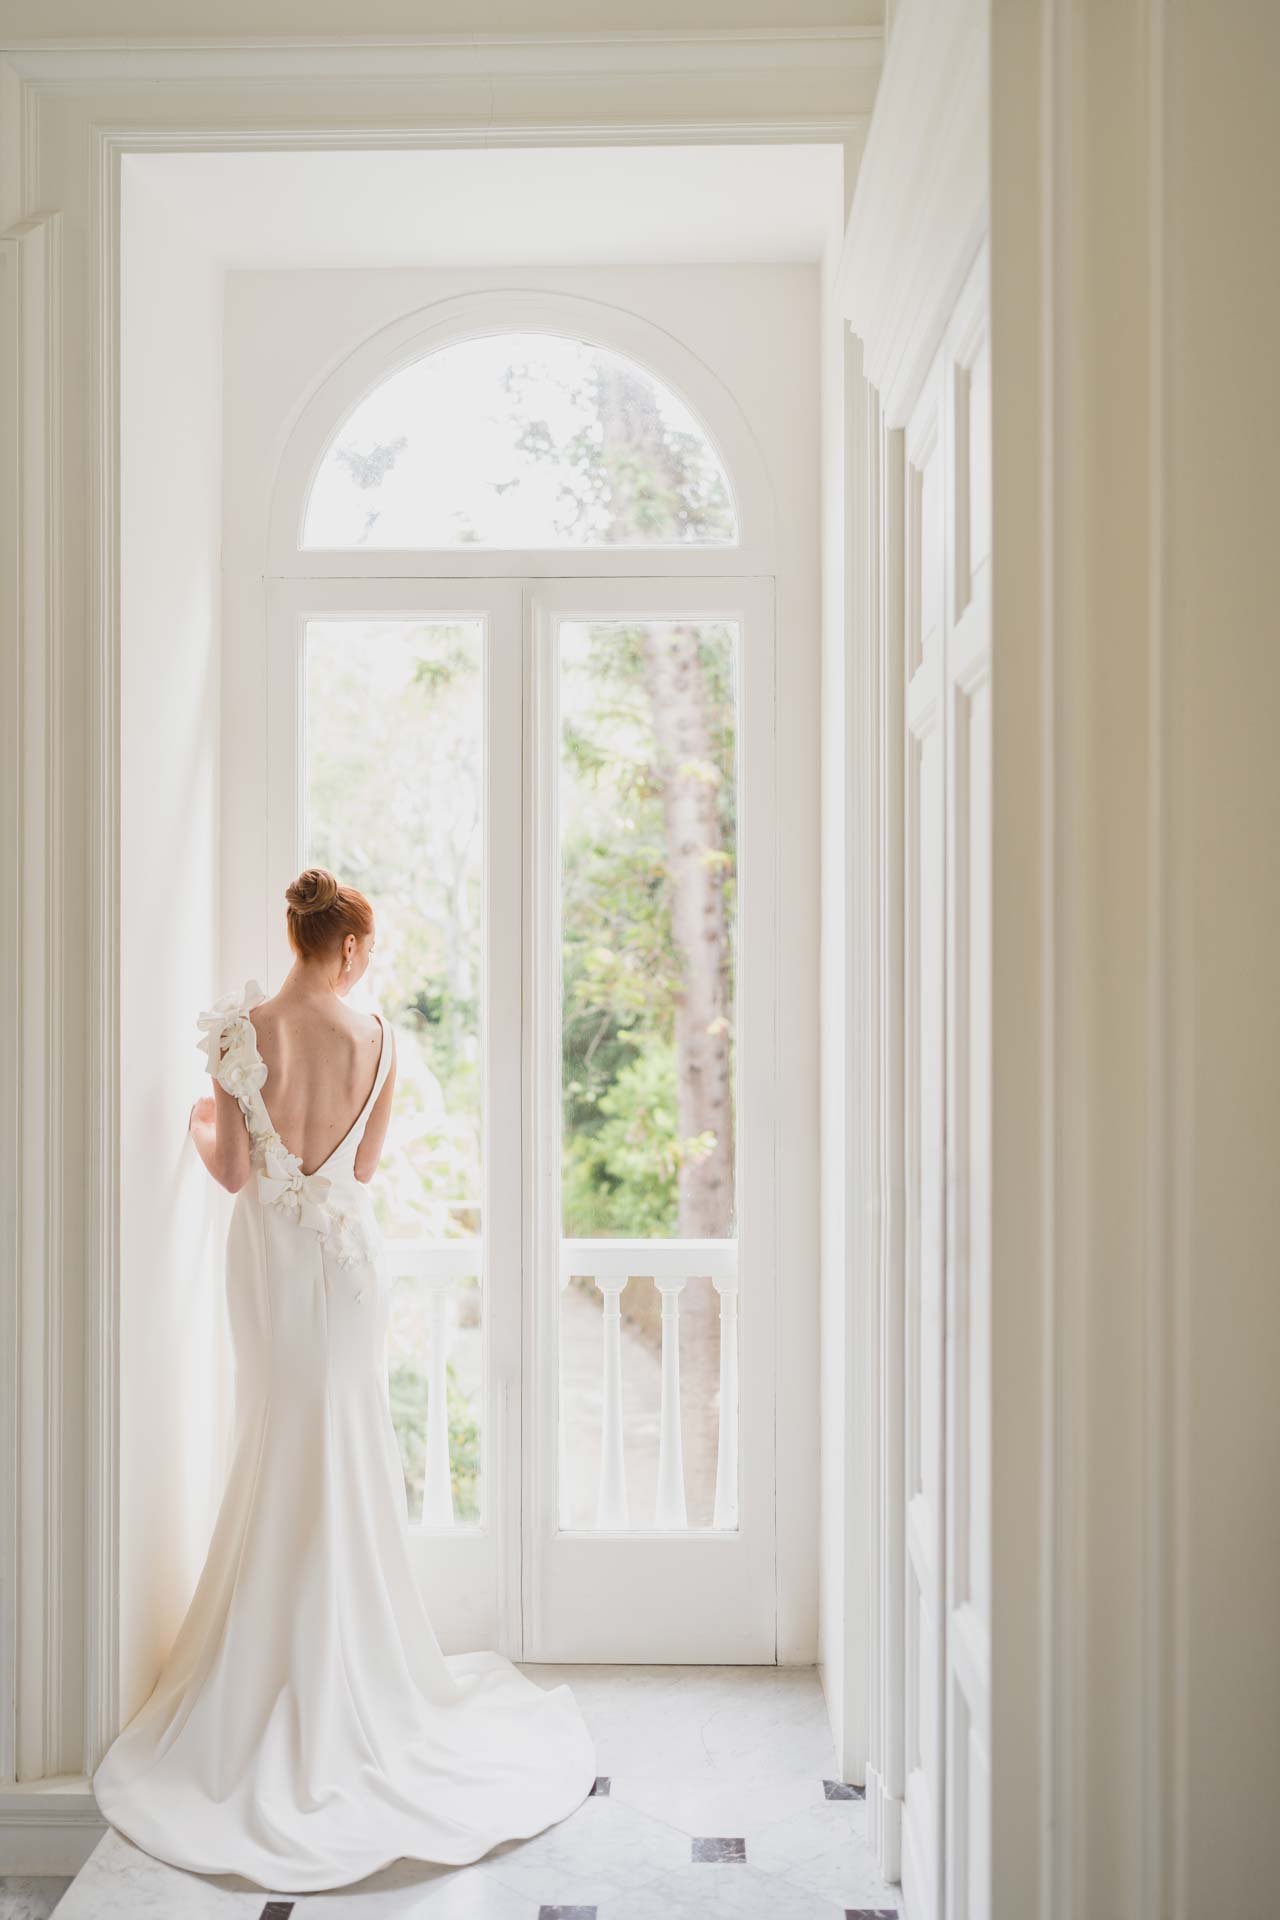 Capturing Contrasts: A Divine Comedy-Inspired Wedding :: 13